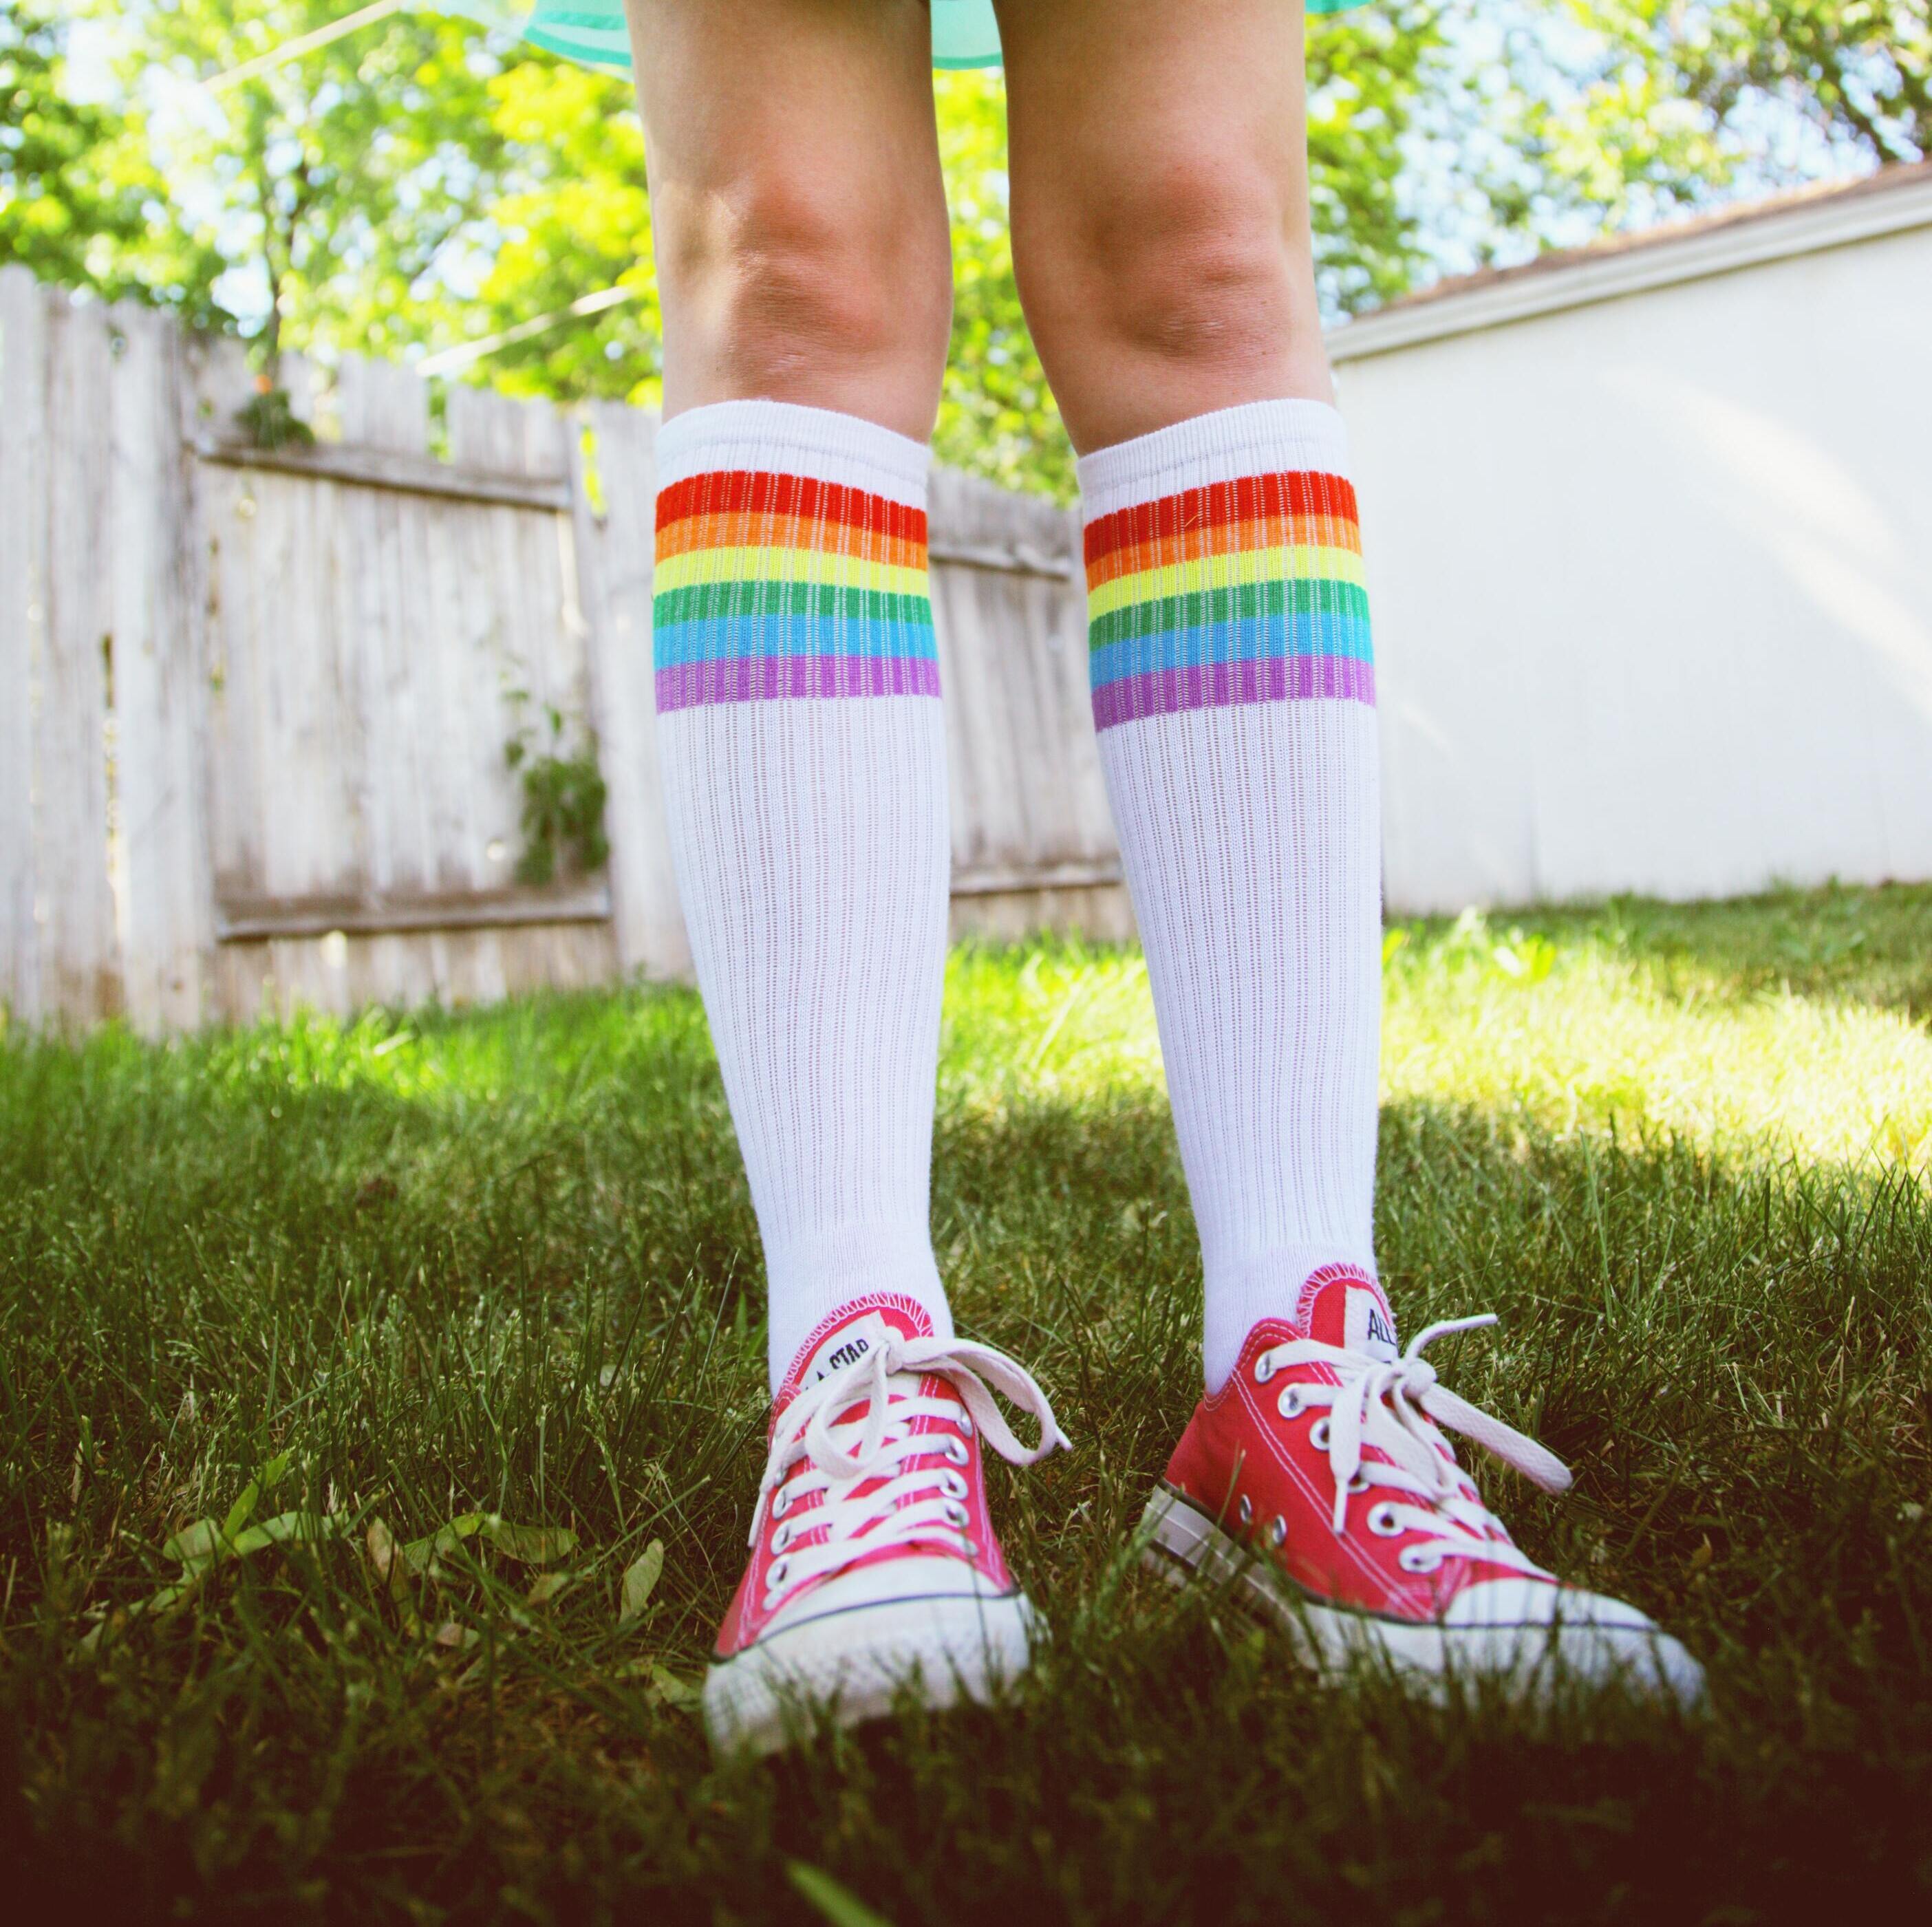 How To Style Your Girl With Knee High Socks?, Kids Fashion and more